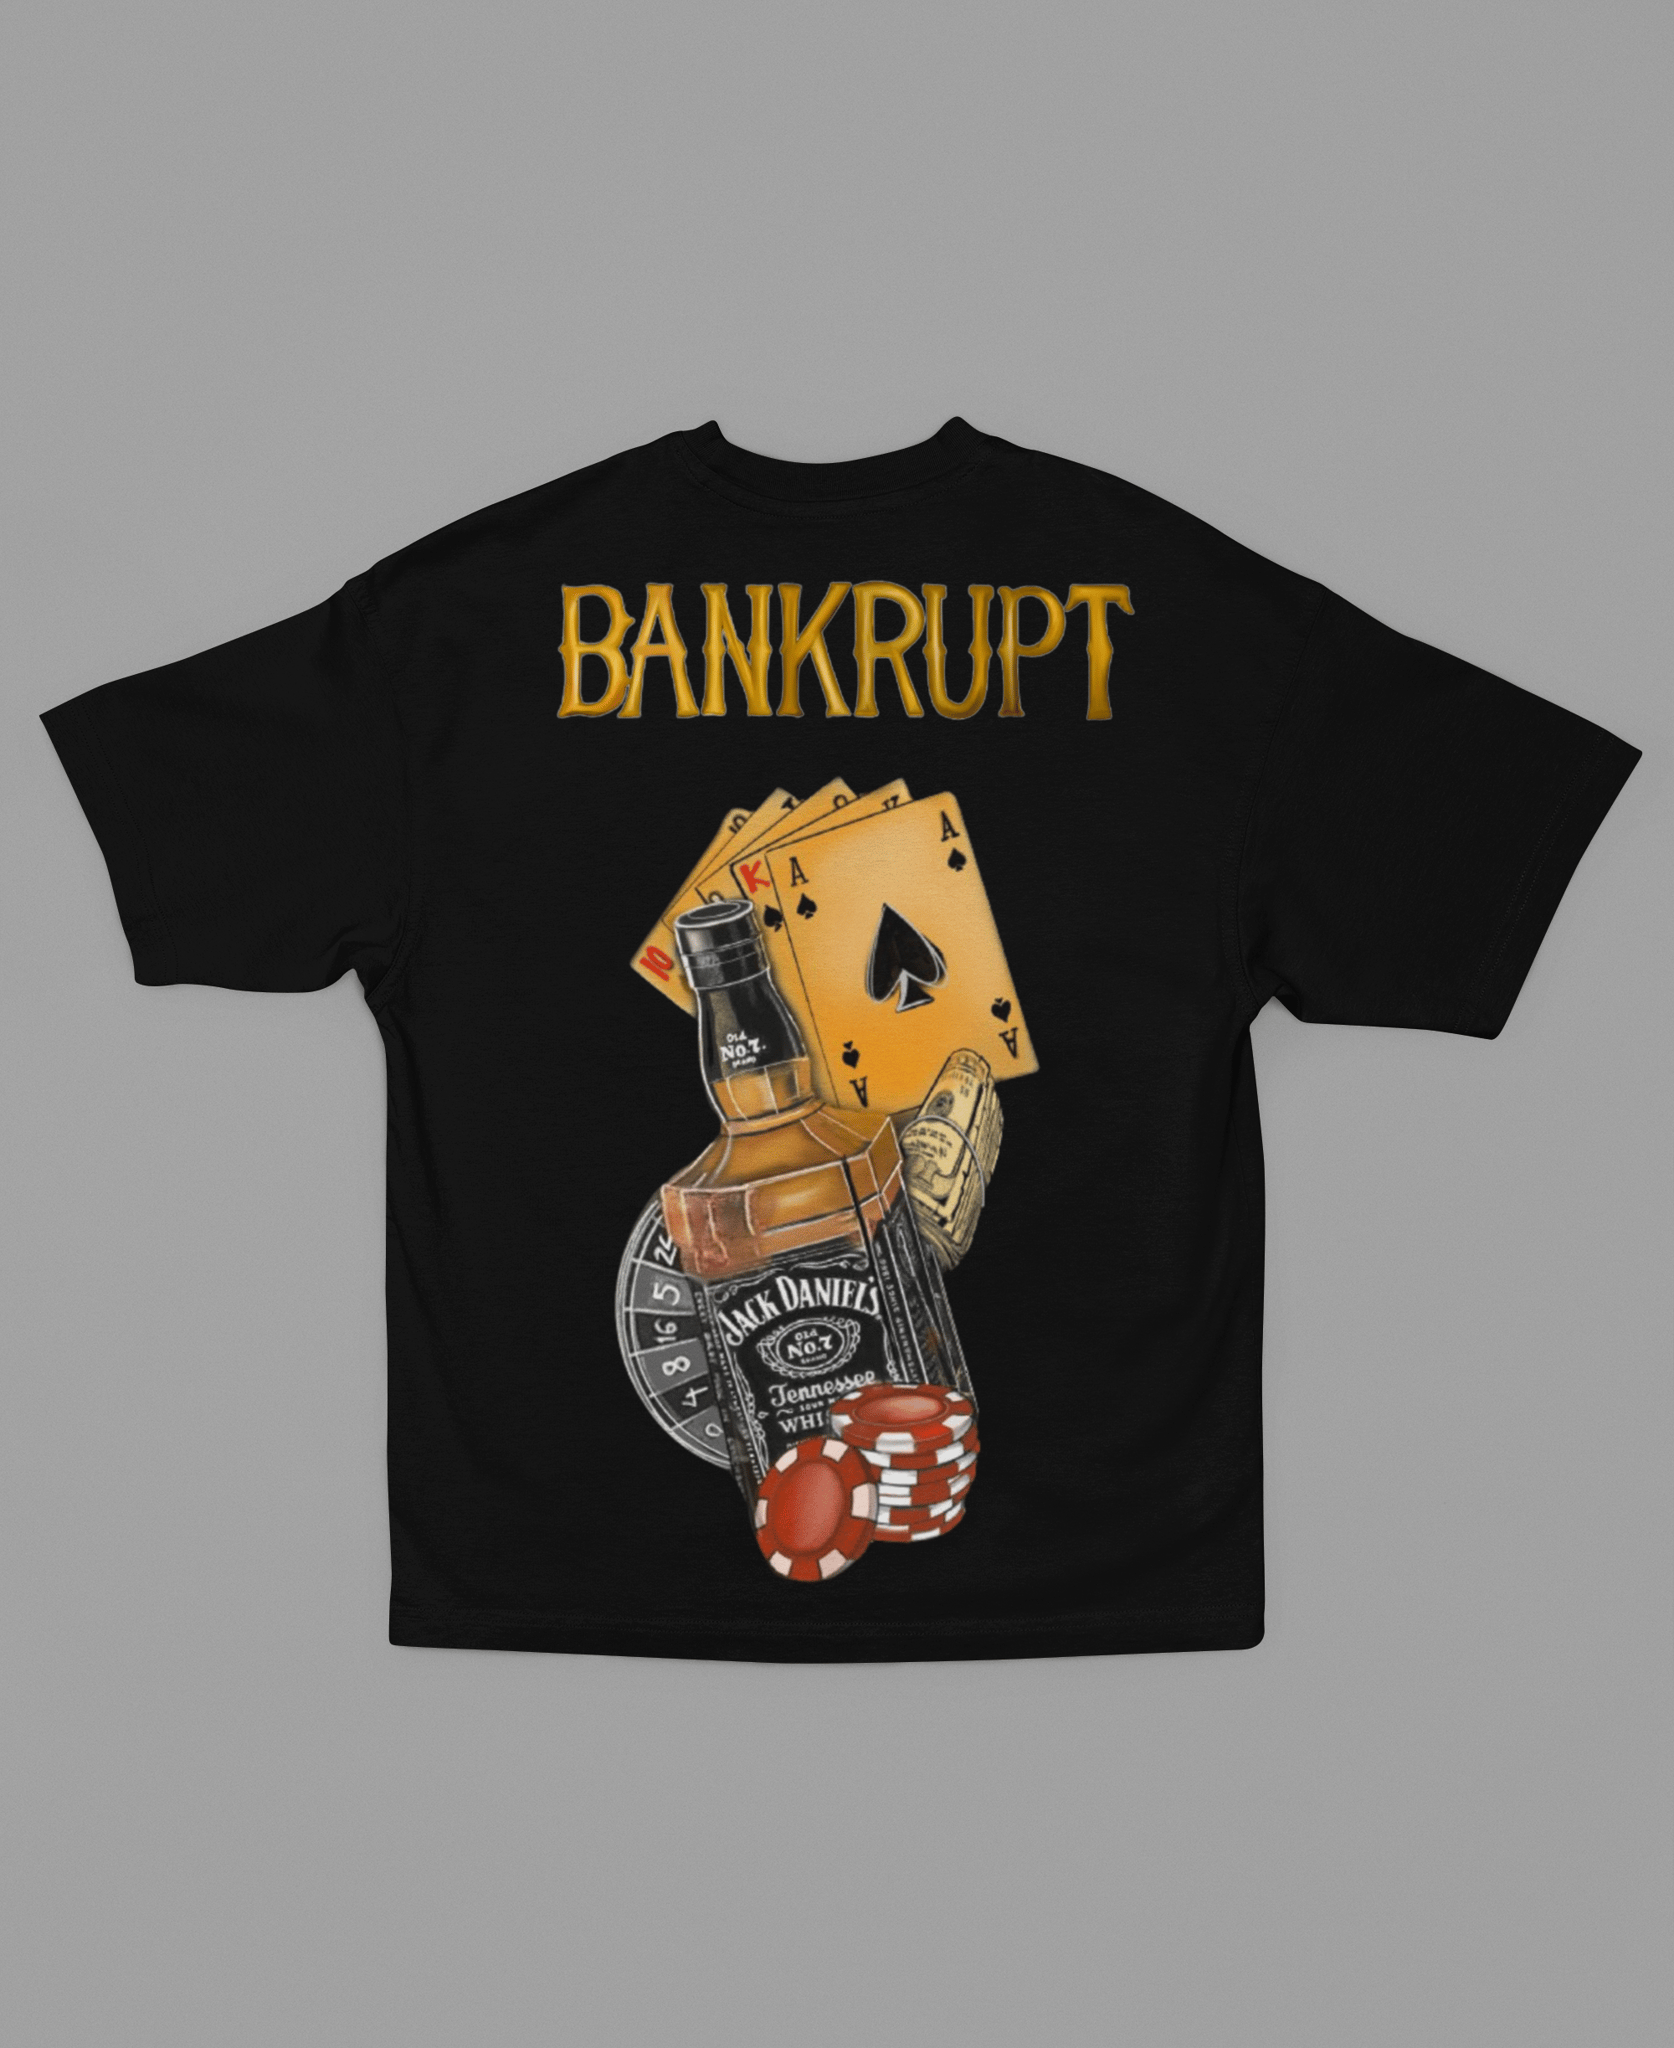 Bankrupt Oversized T shirt (Black) - FRENCH TERRY COTTON 240 GSM